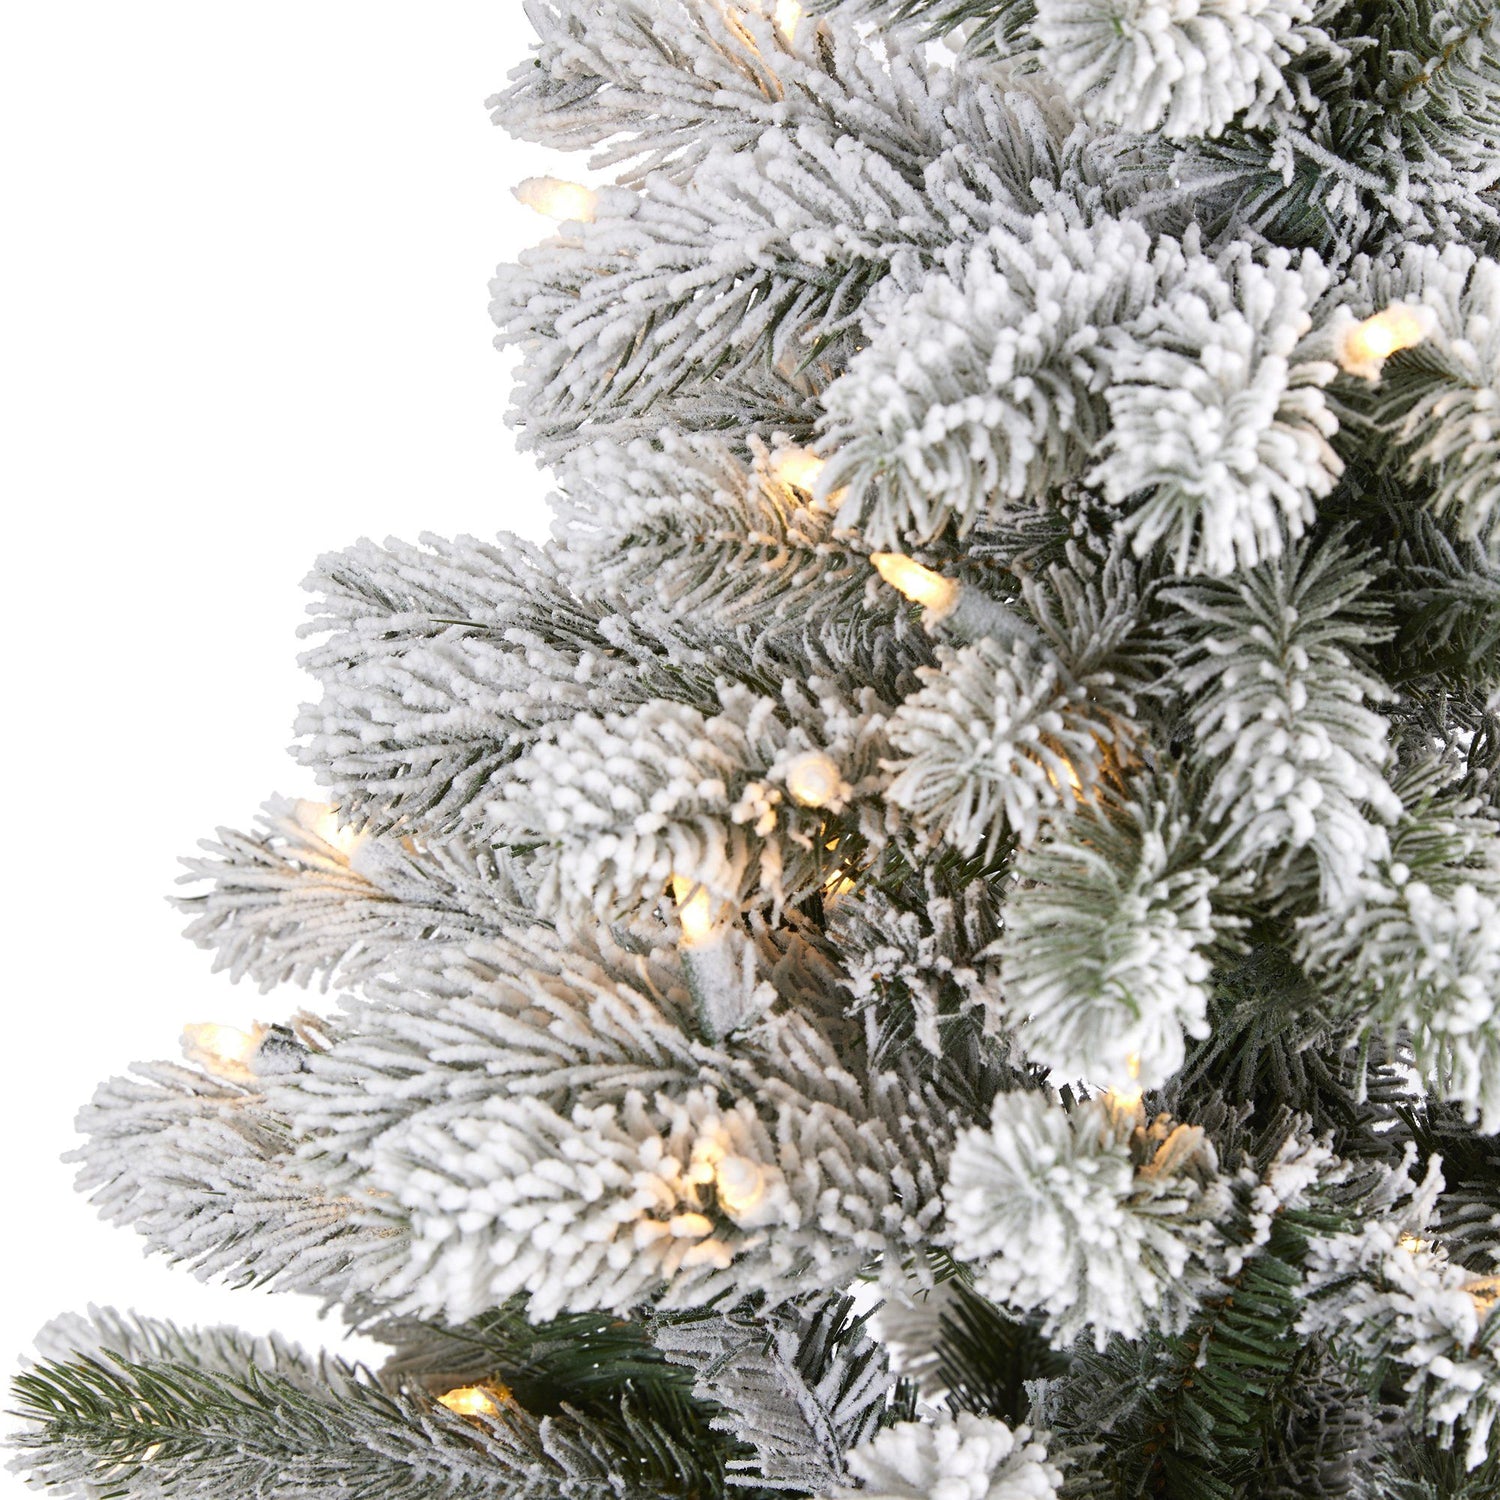 5’ Flocked South Carolina Spruce Artificial Christmas Tree with 300 Clear Lights and 621 Bendable Branches